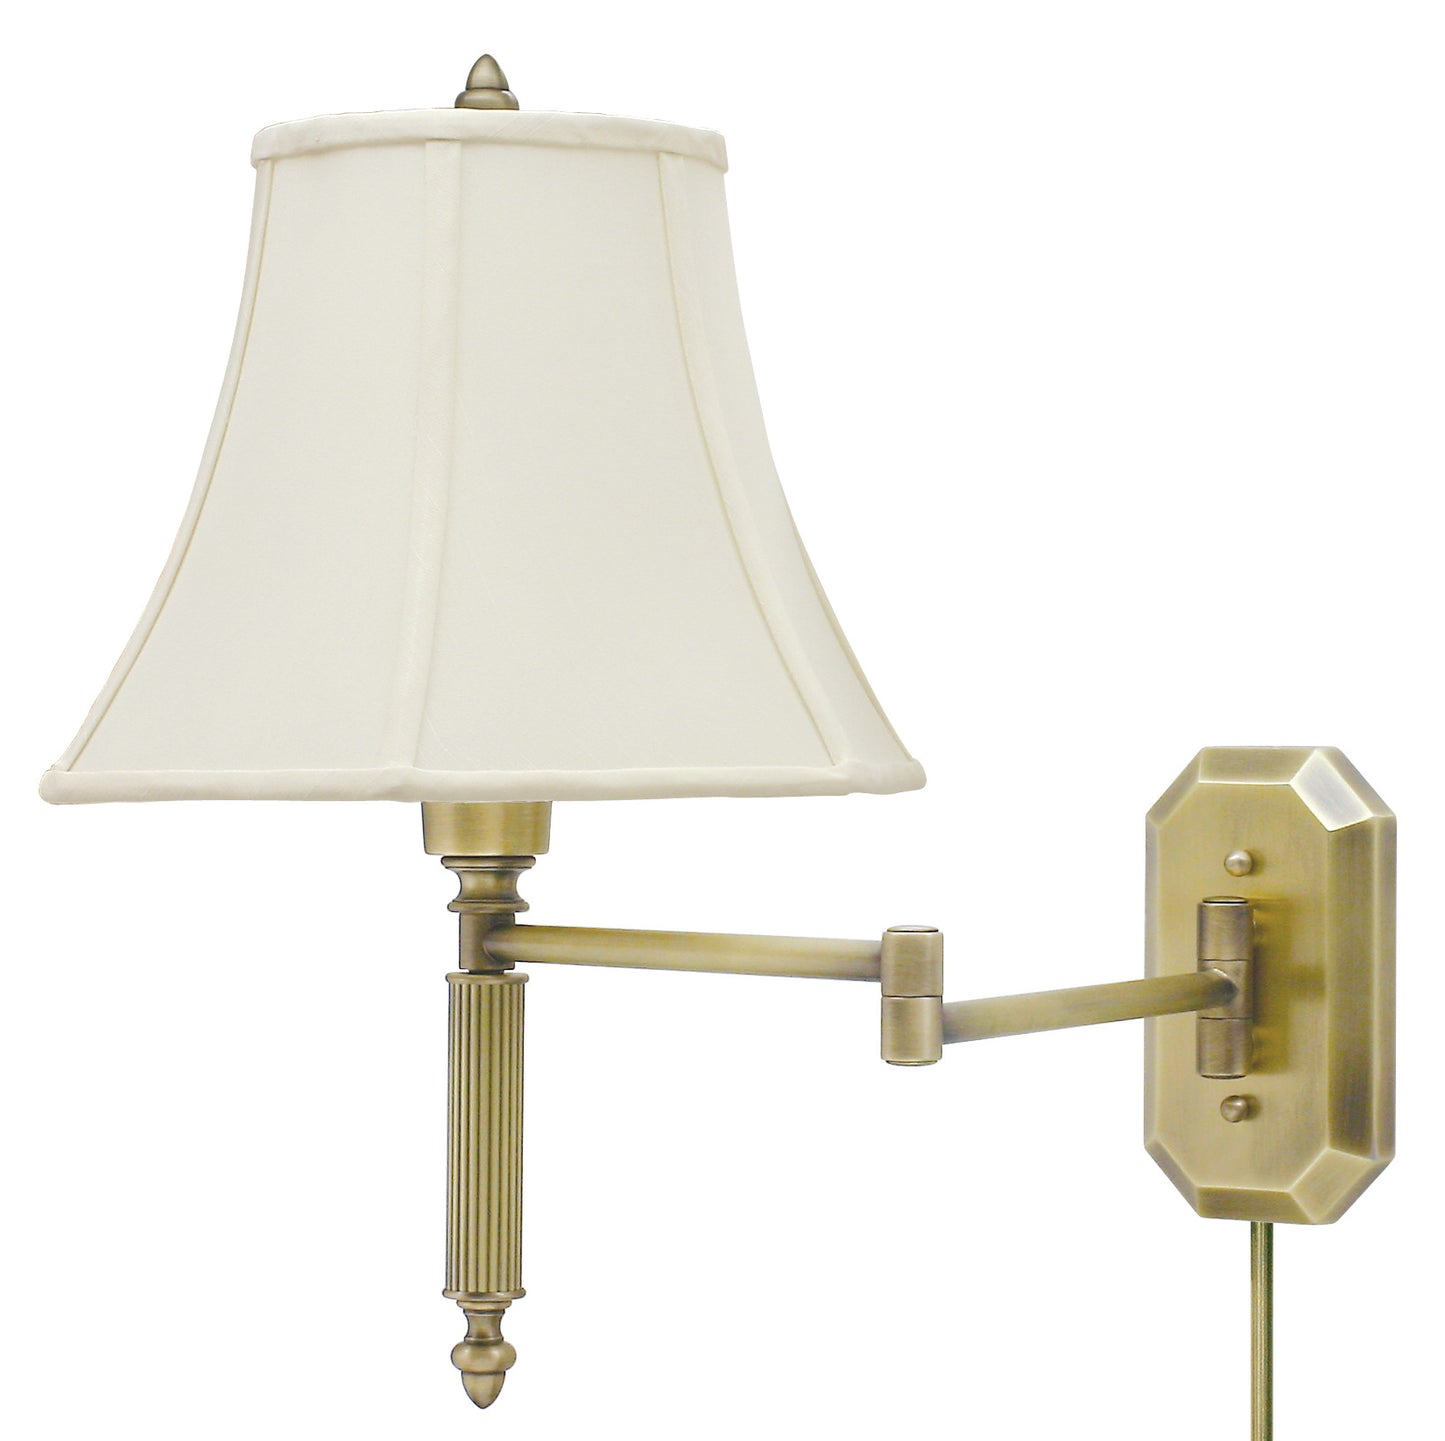 House of Troy Wall Swing Arm Lamp in Antique Brass WS-706-AB